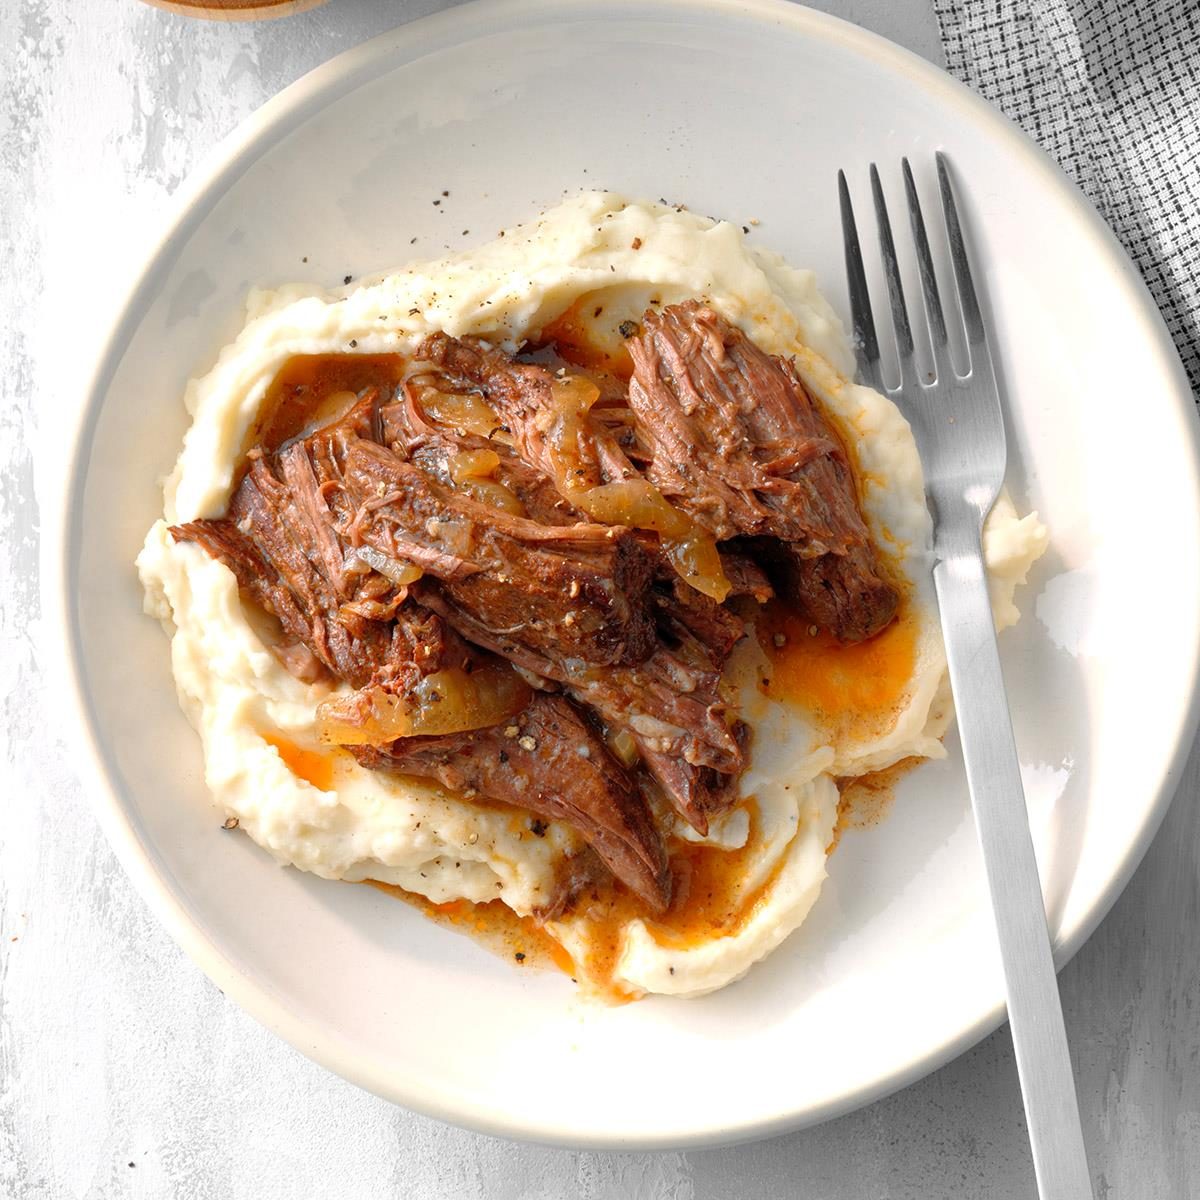 favourite slow cooker recipes - Shredded green Chile beef